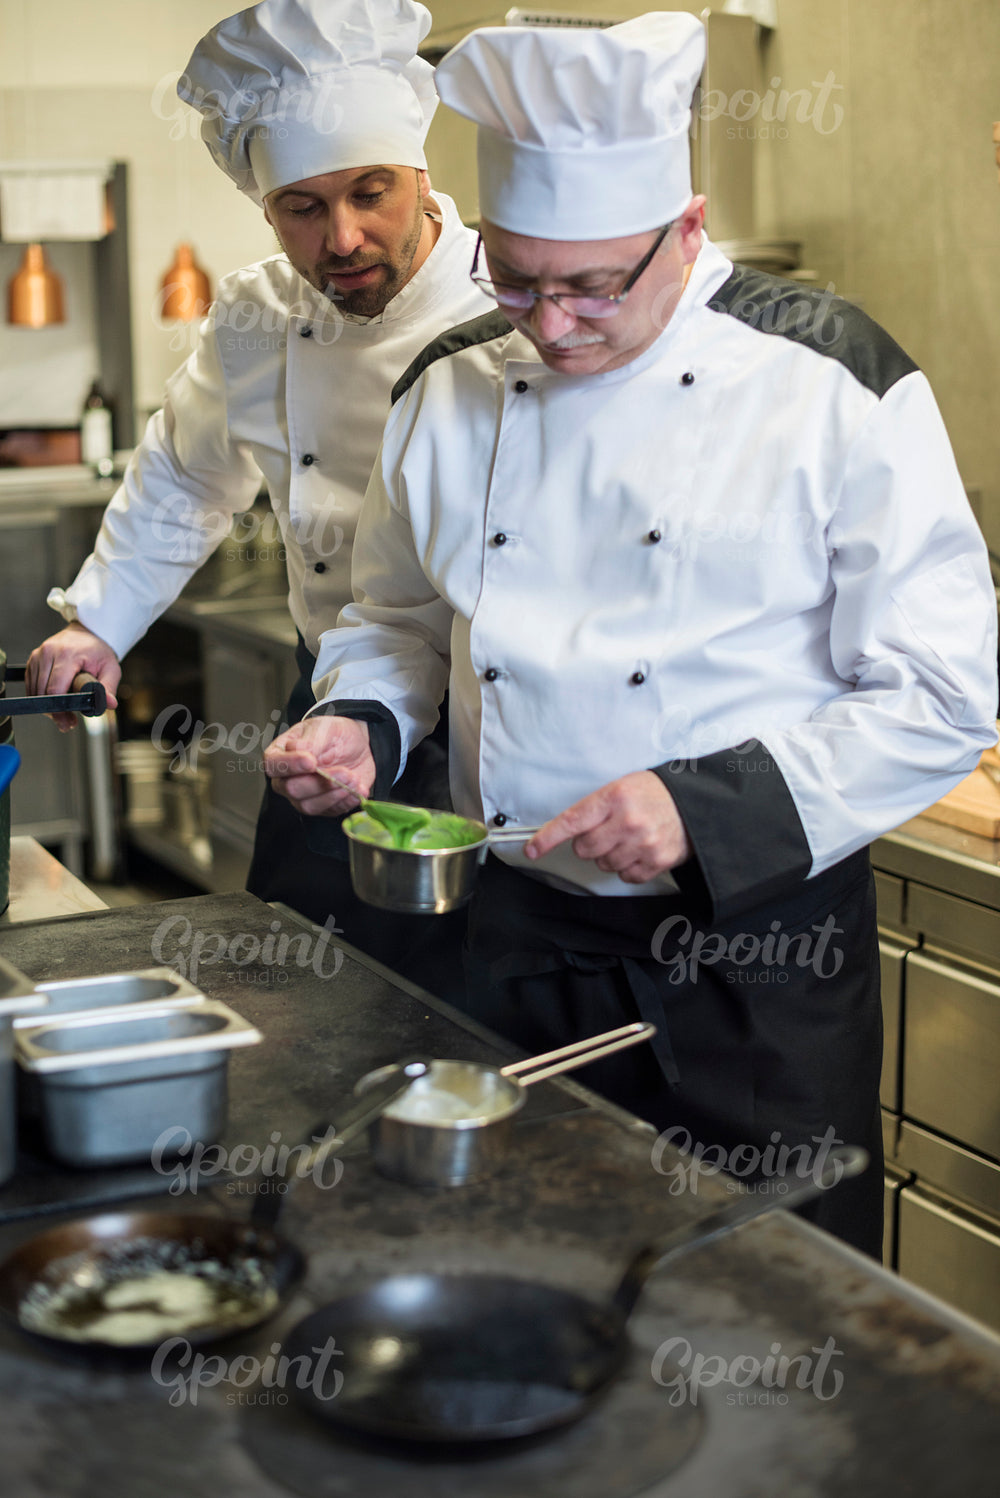 Cook learning from the chef